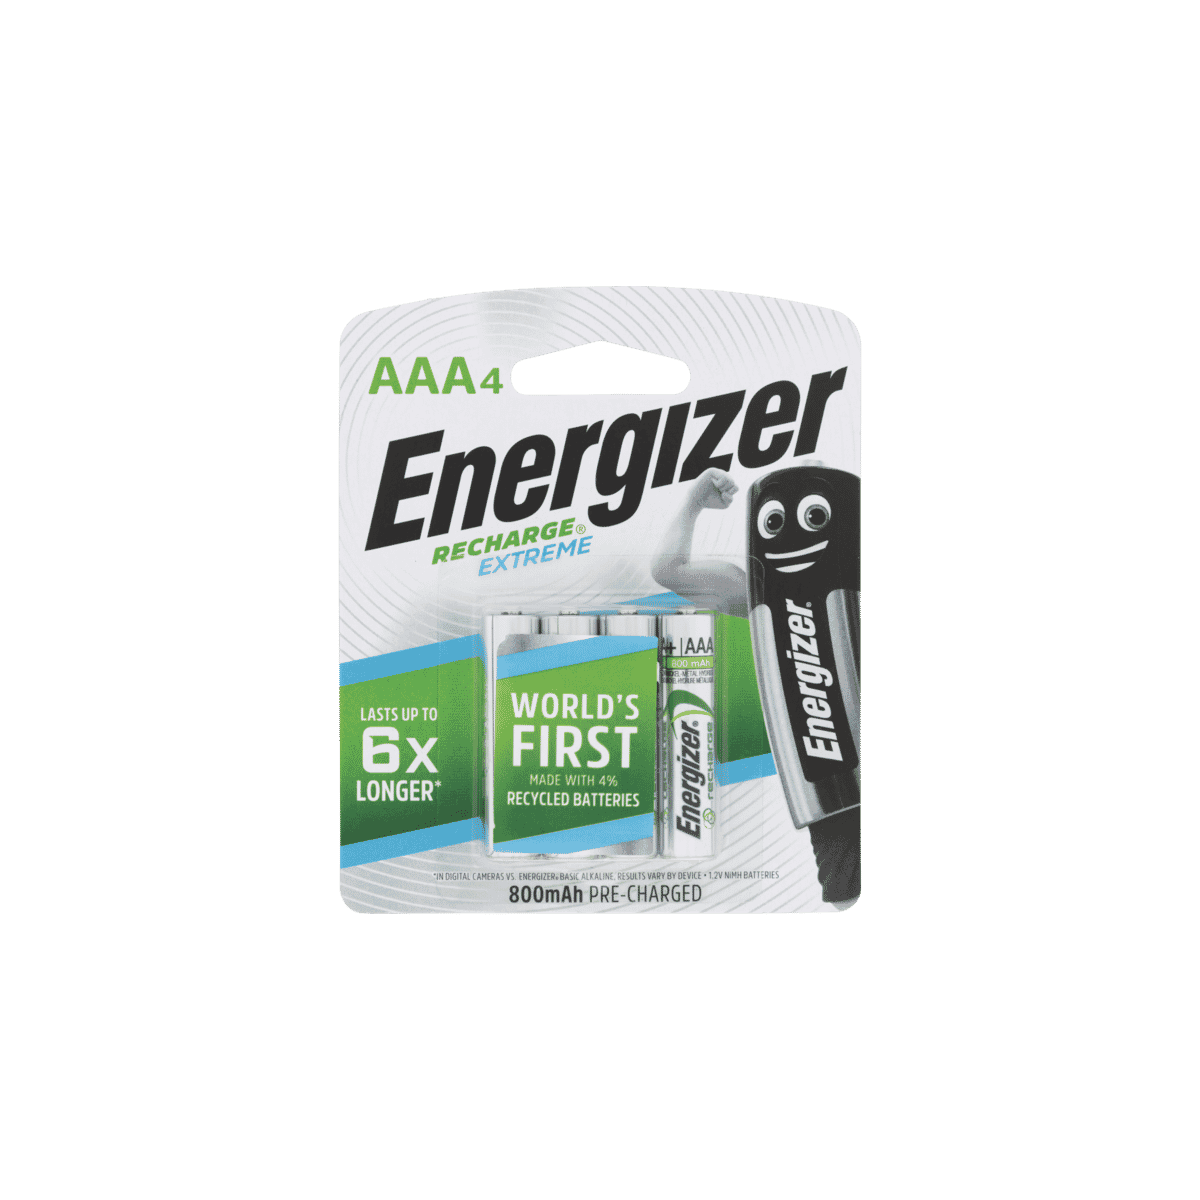 Energizer 4pk Rechargeable Power Plus AAA Batteries